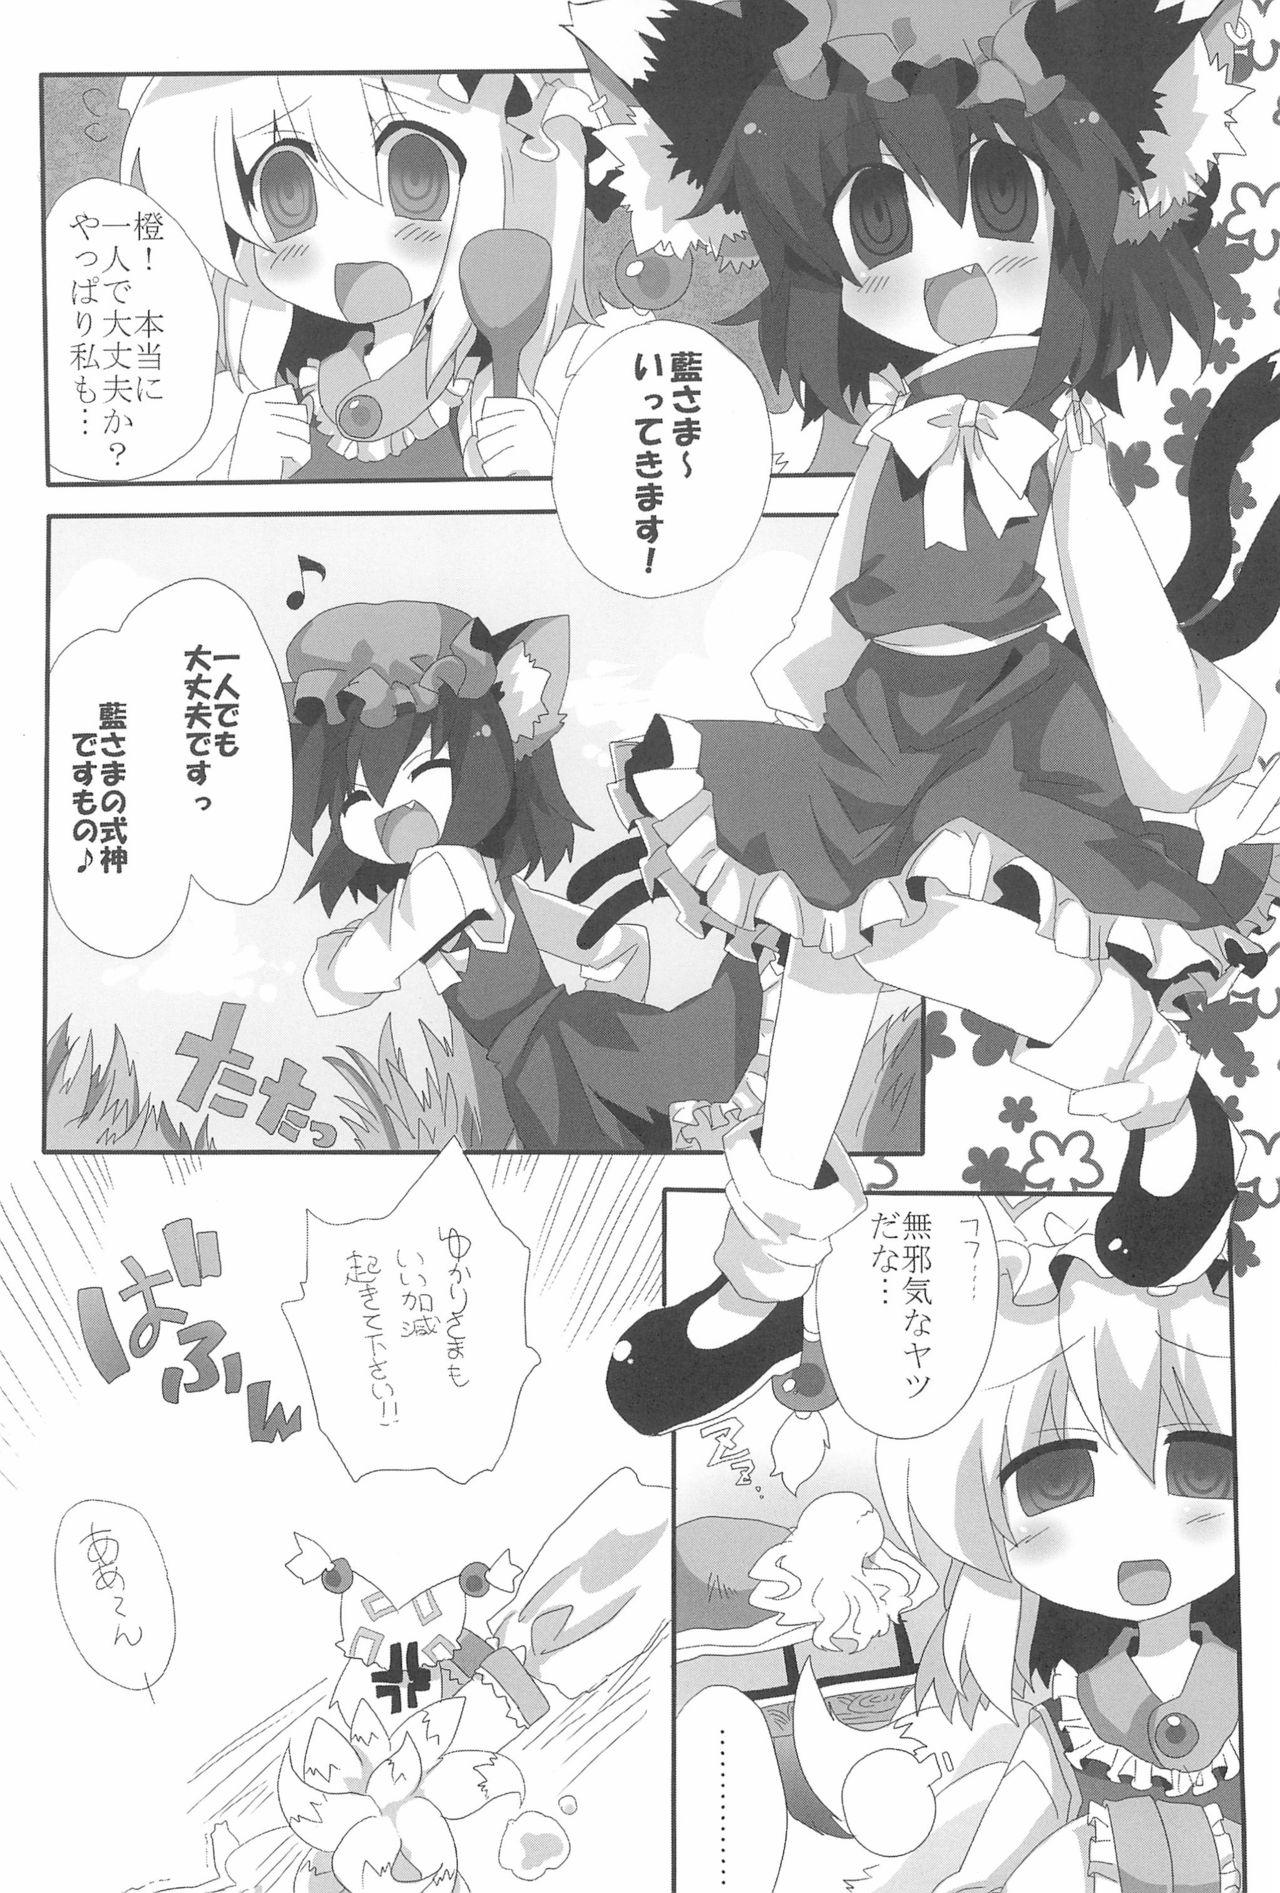 Dildos NYAS! ATTRACTION - Touhou project Free Amature Porn - Page 4